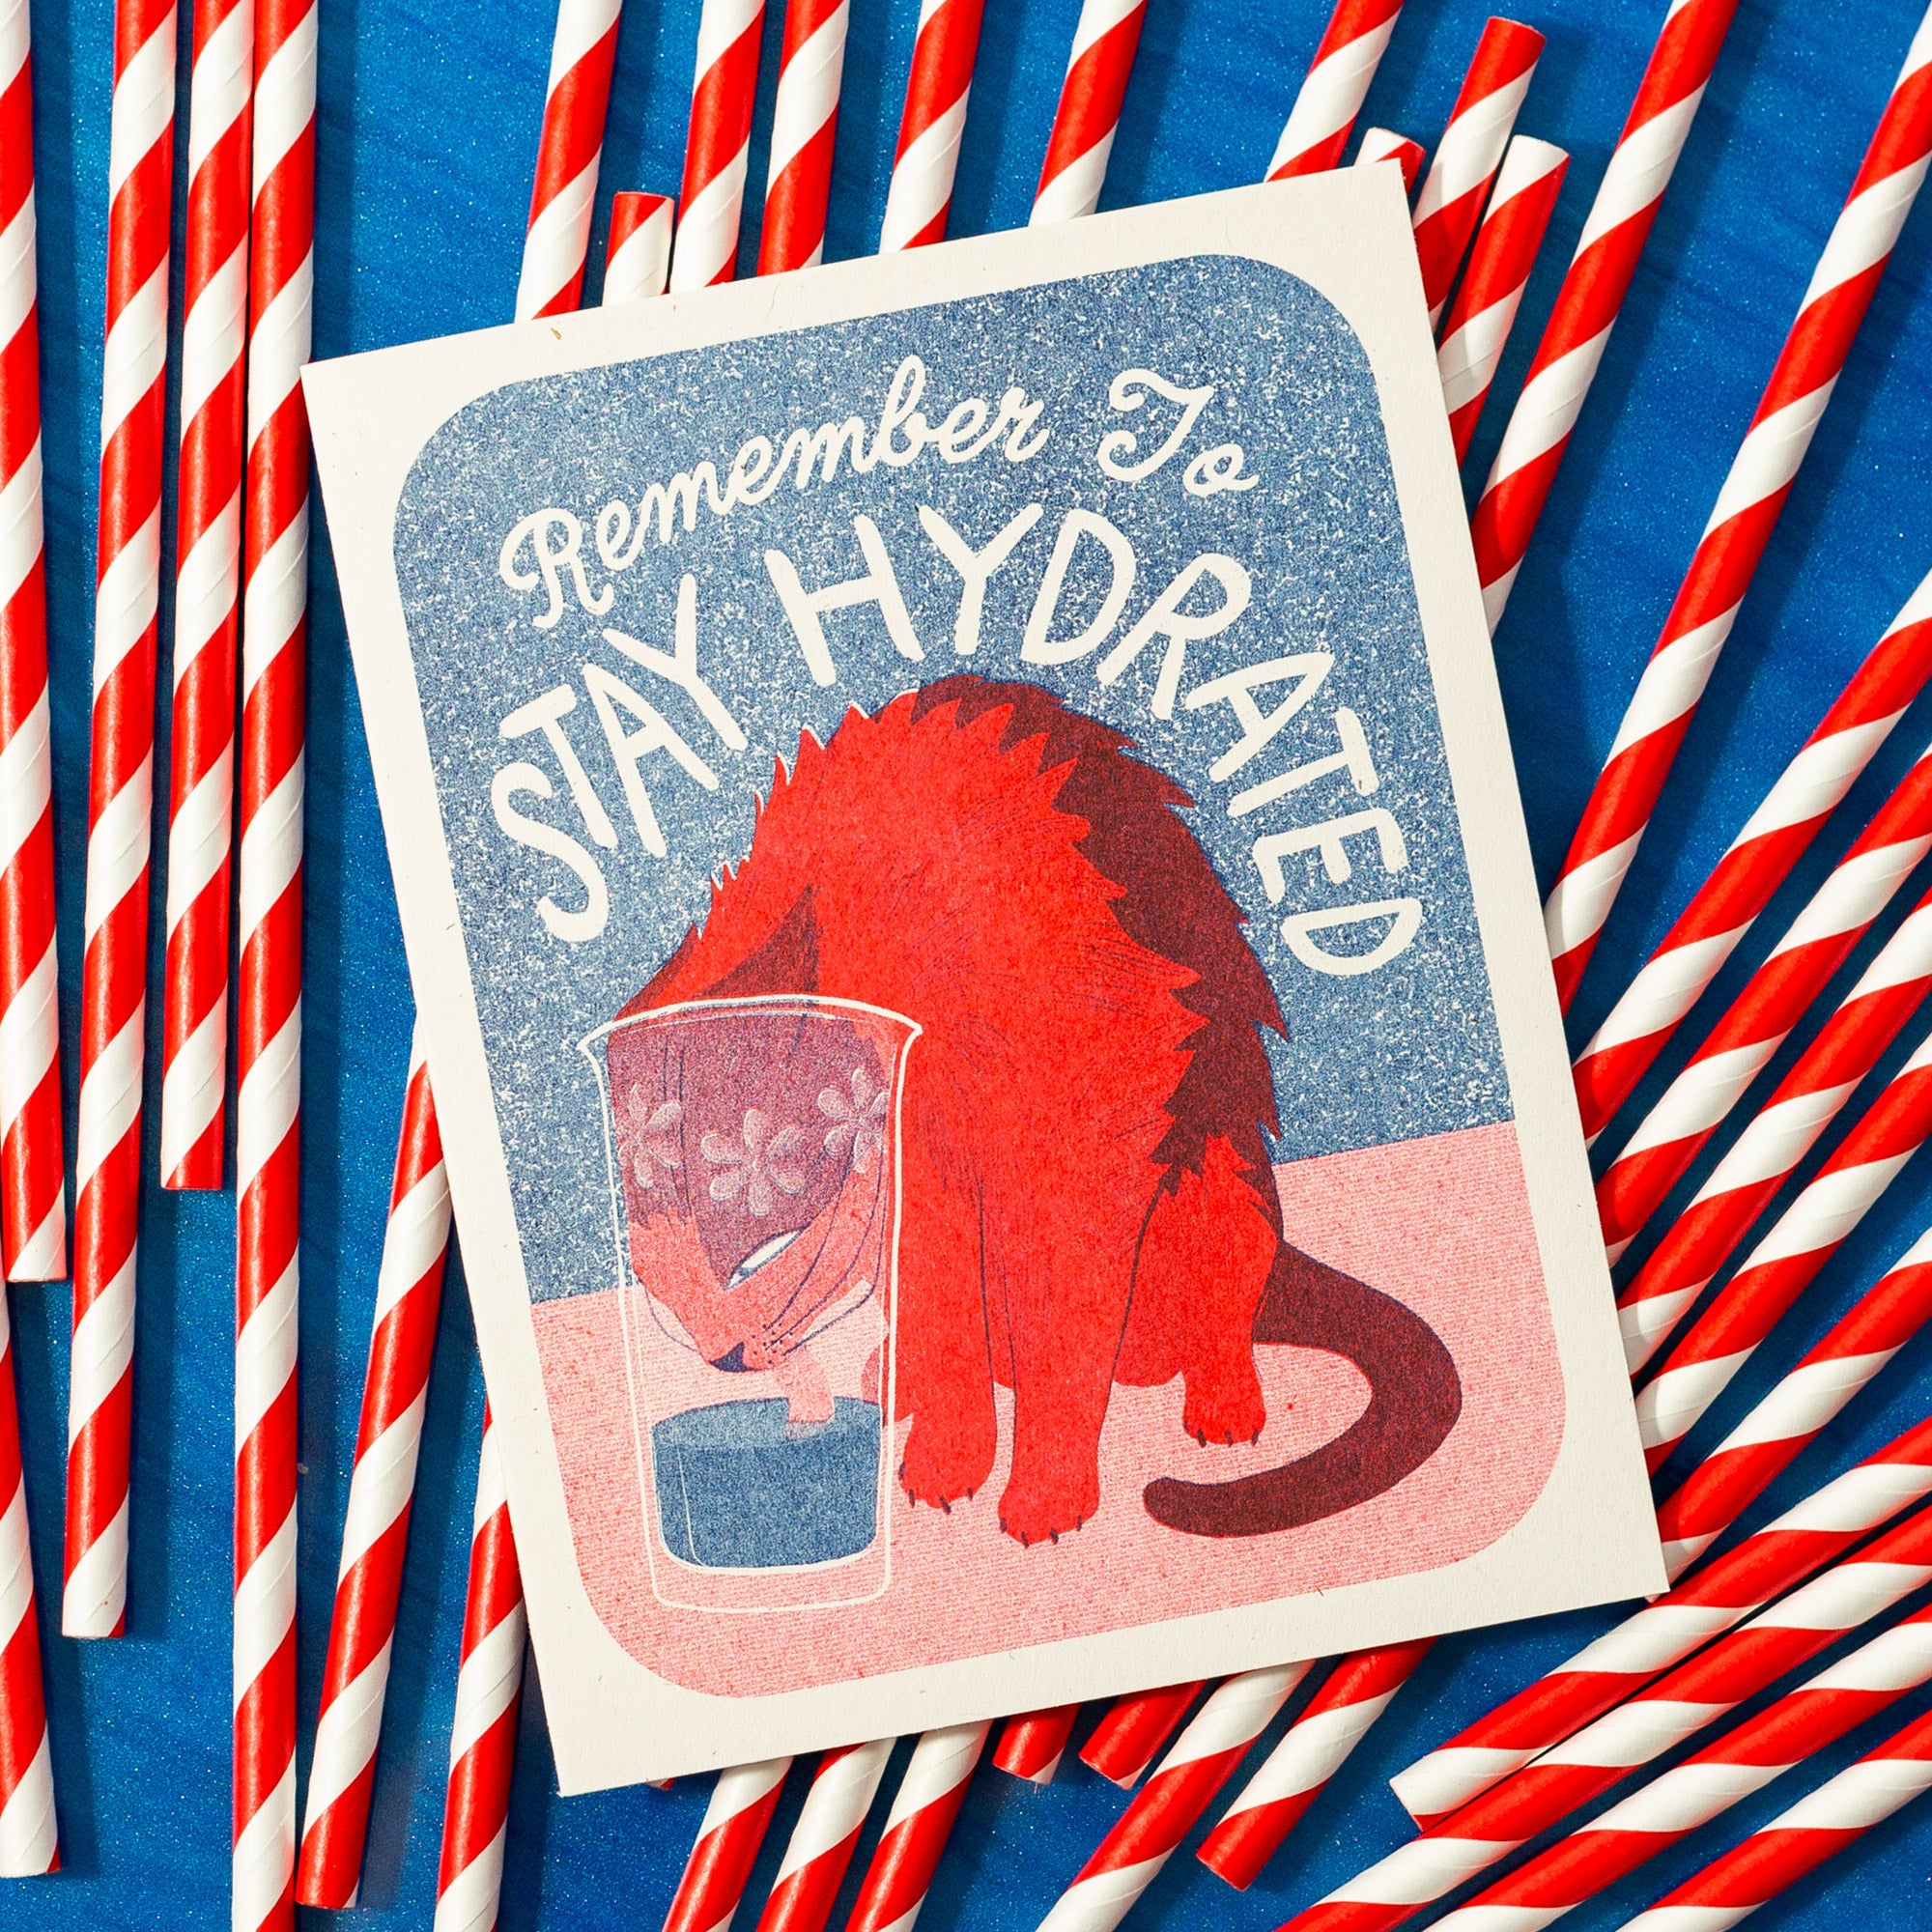 Stay Hydrated - Risograph Greeting Card